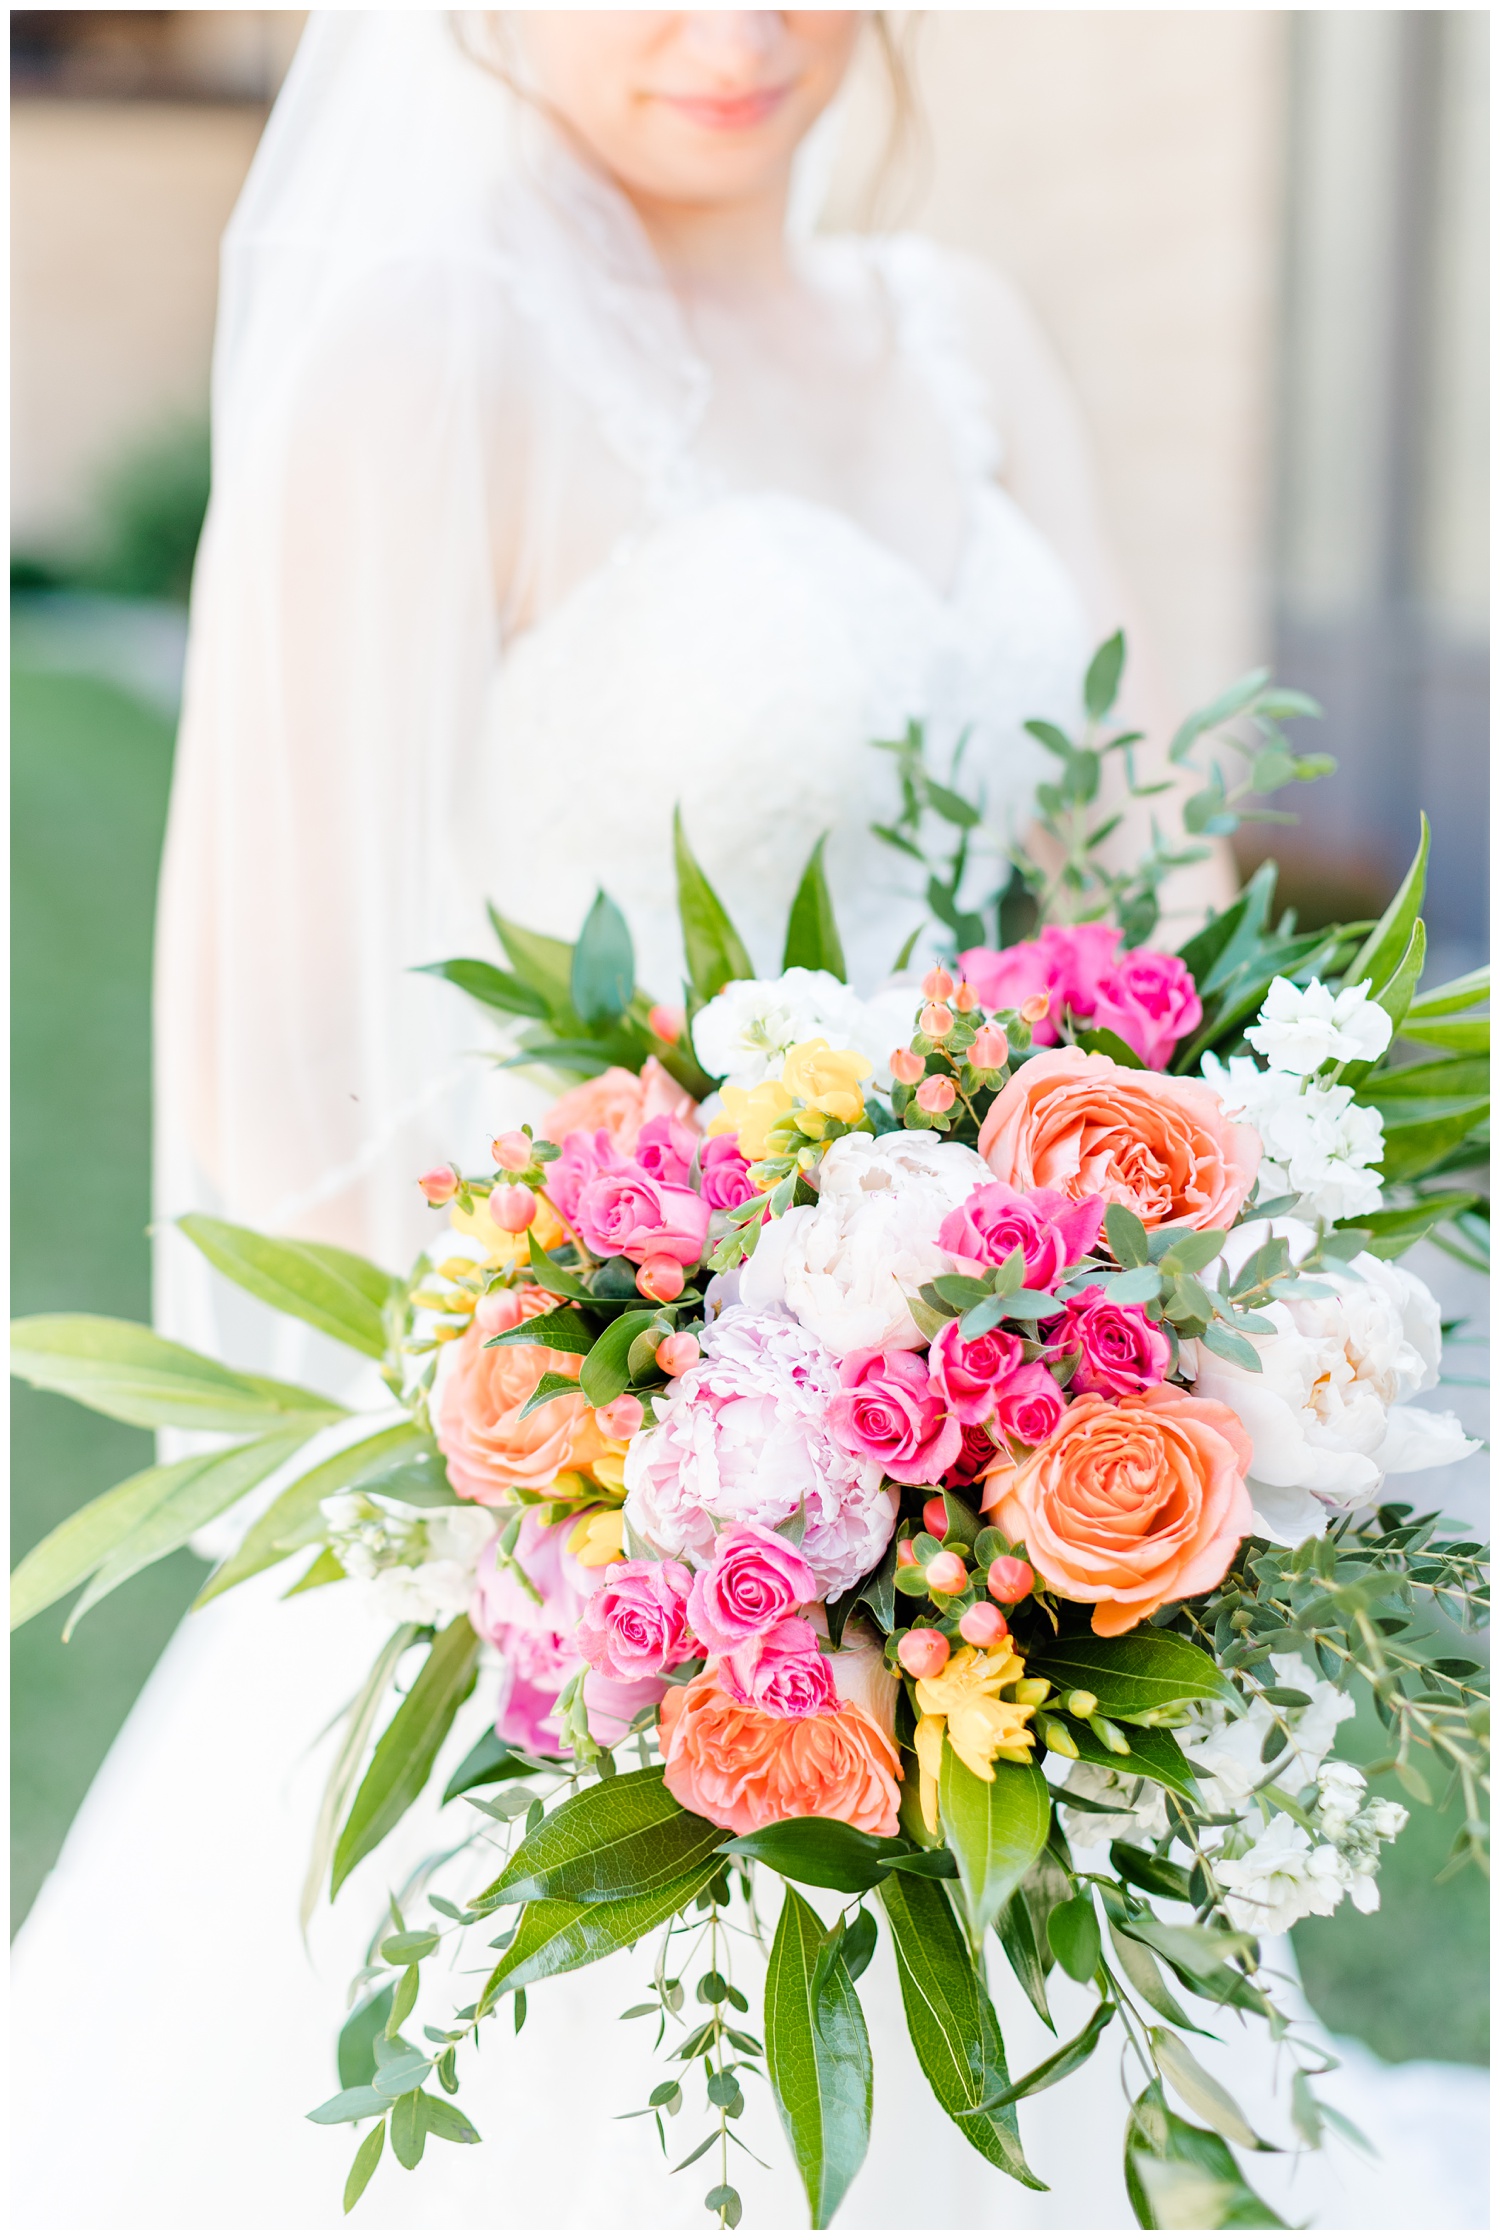 A pink, coral, white bridal bouquet with a touch of yellow, featuring garden roses, mini roses and peonies | CB Studio